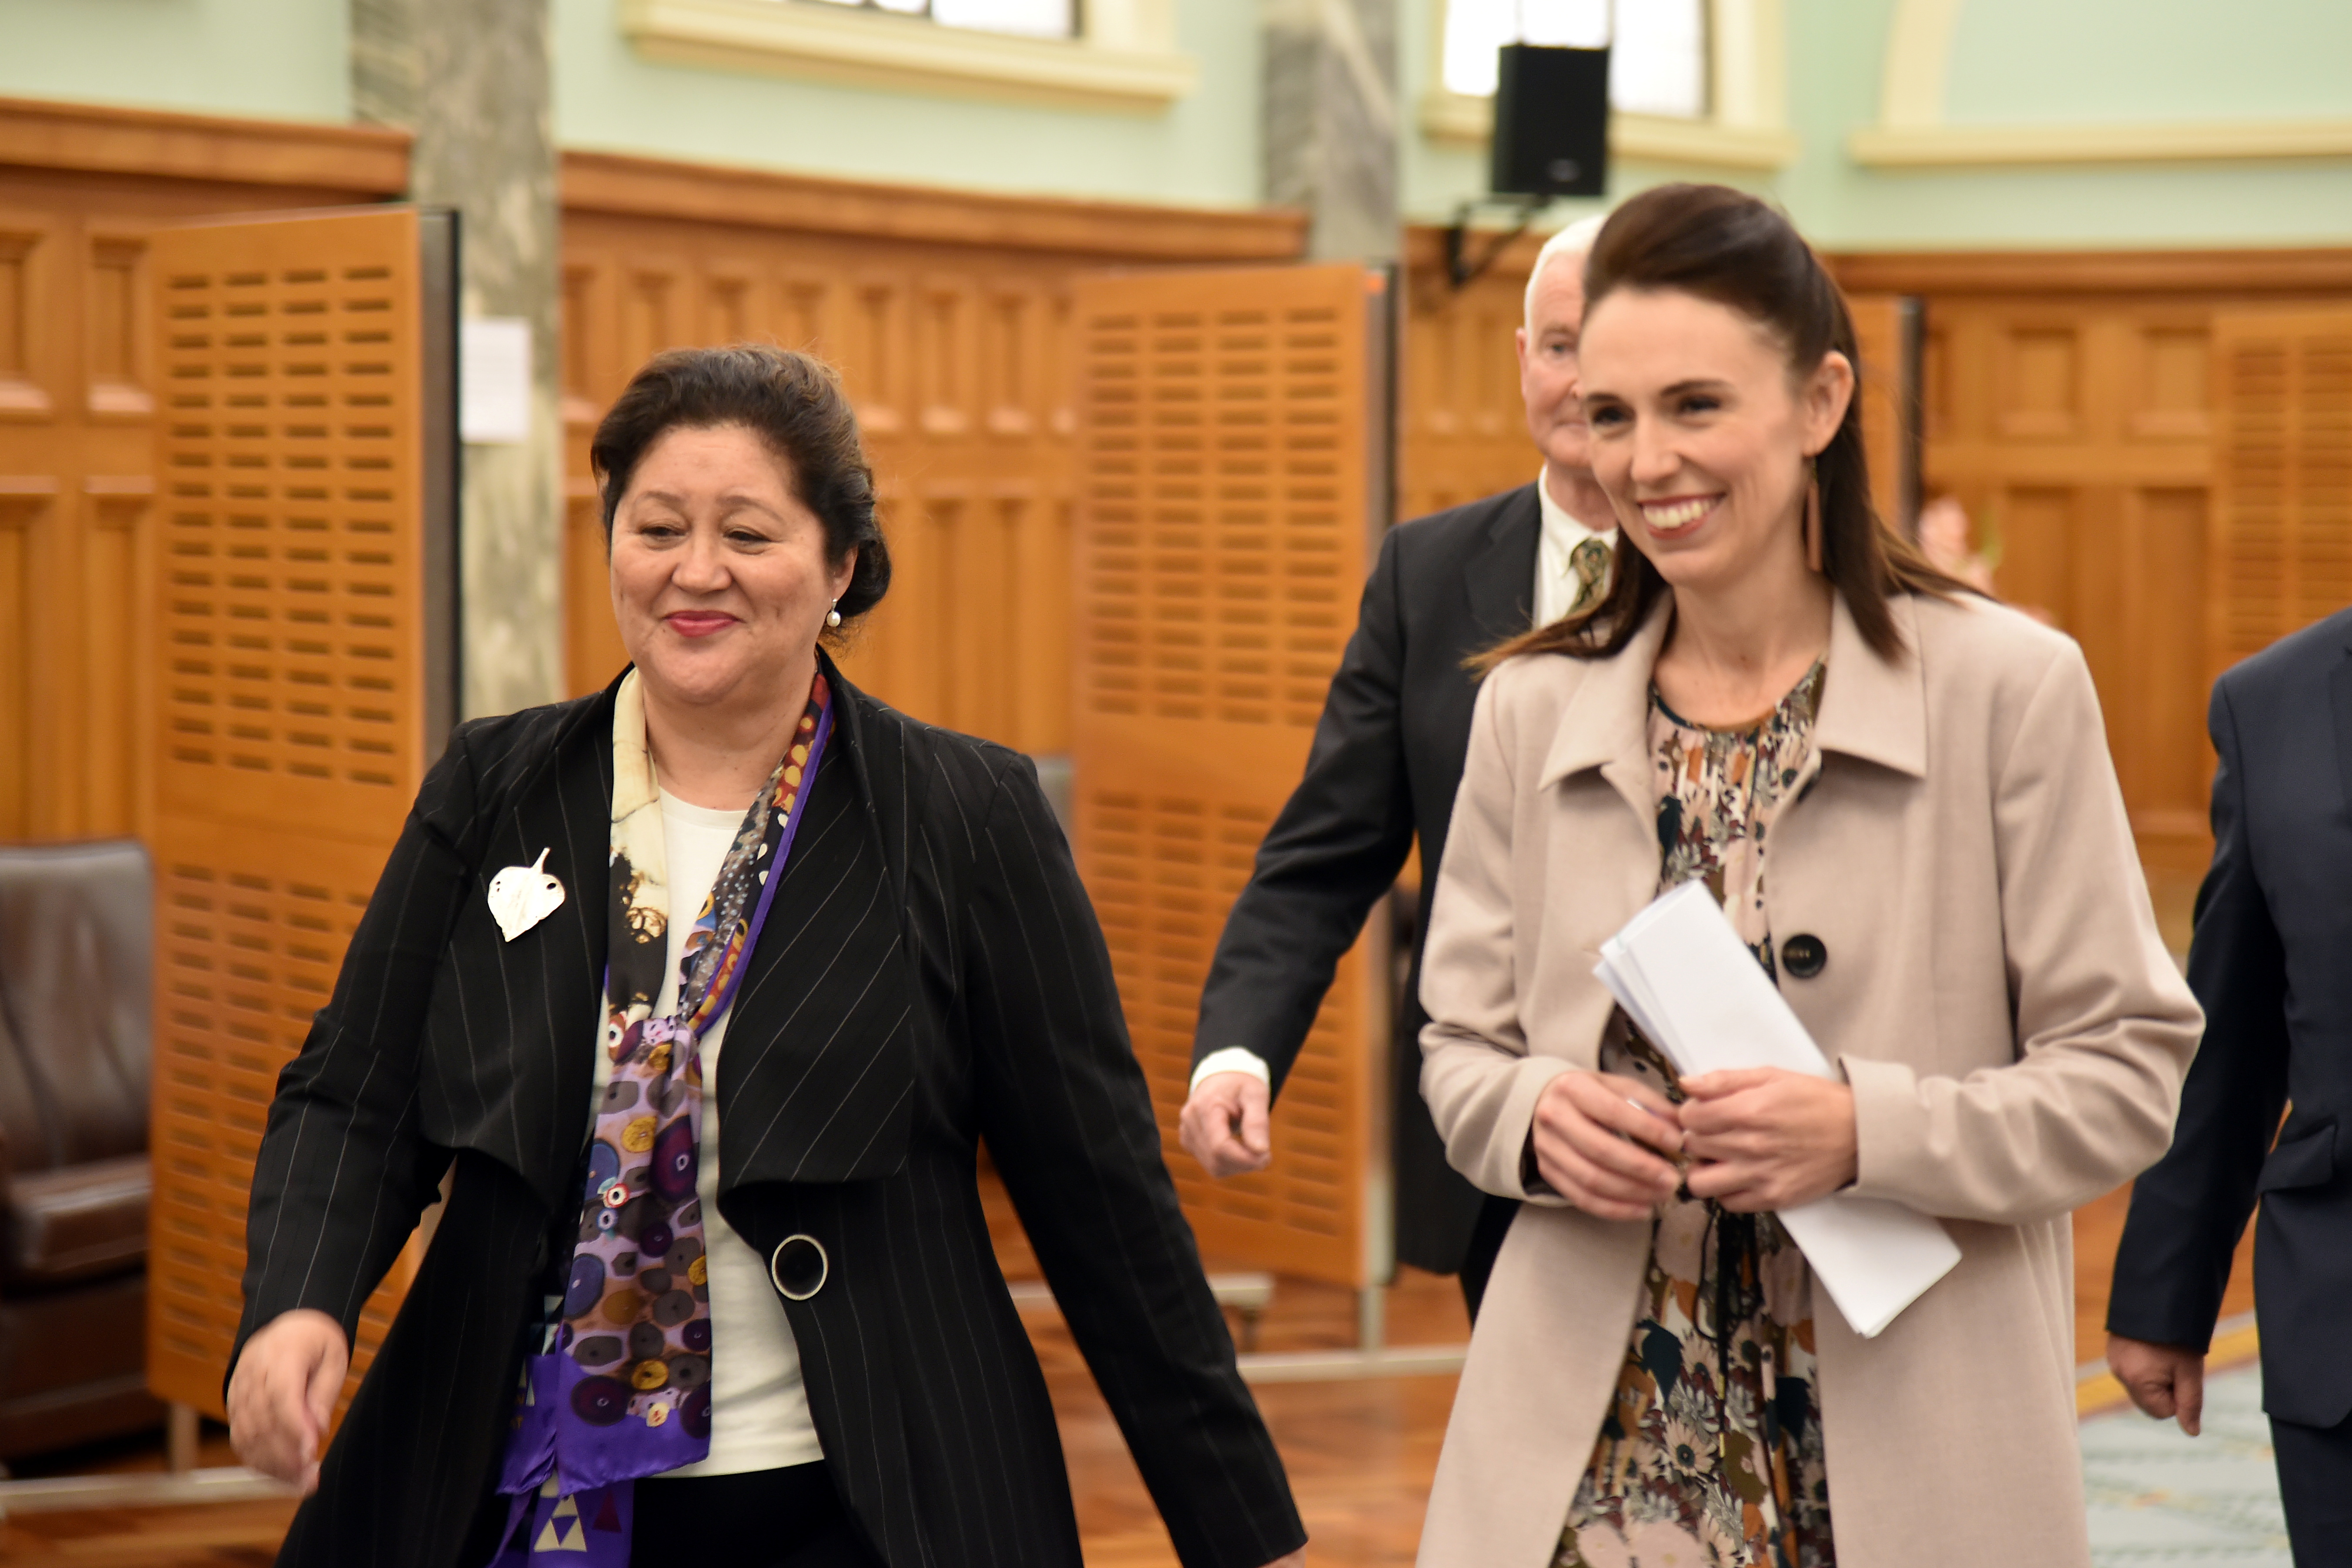 New Zealand Governor-General designate Kiro (L) and Prime Minister Ardern at Parliament House in Wellington